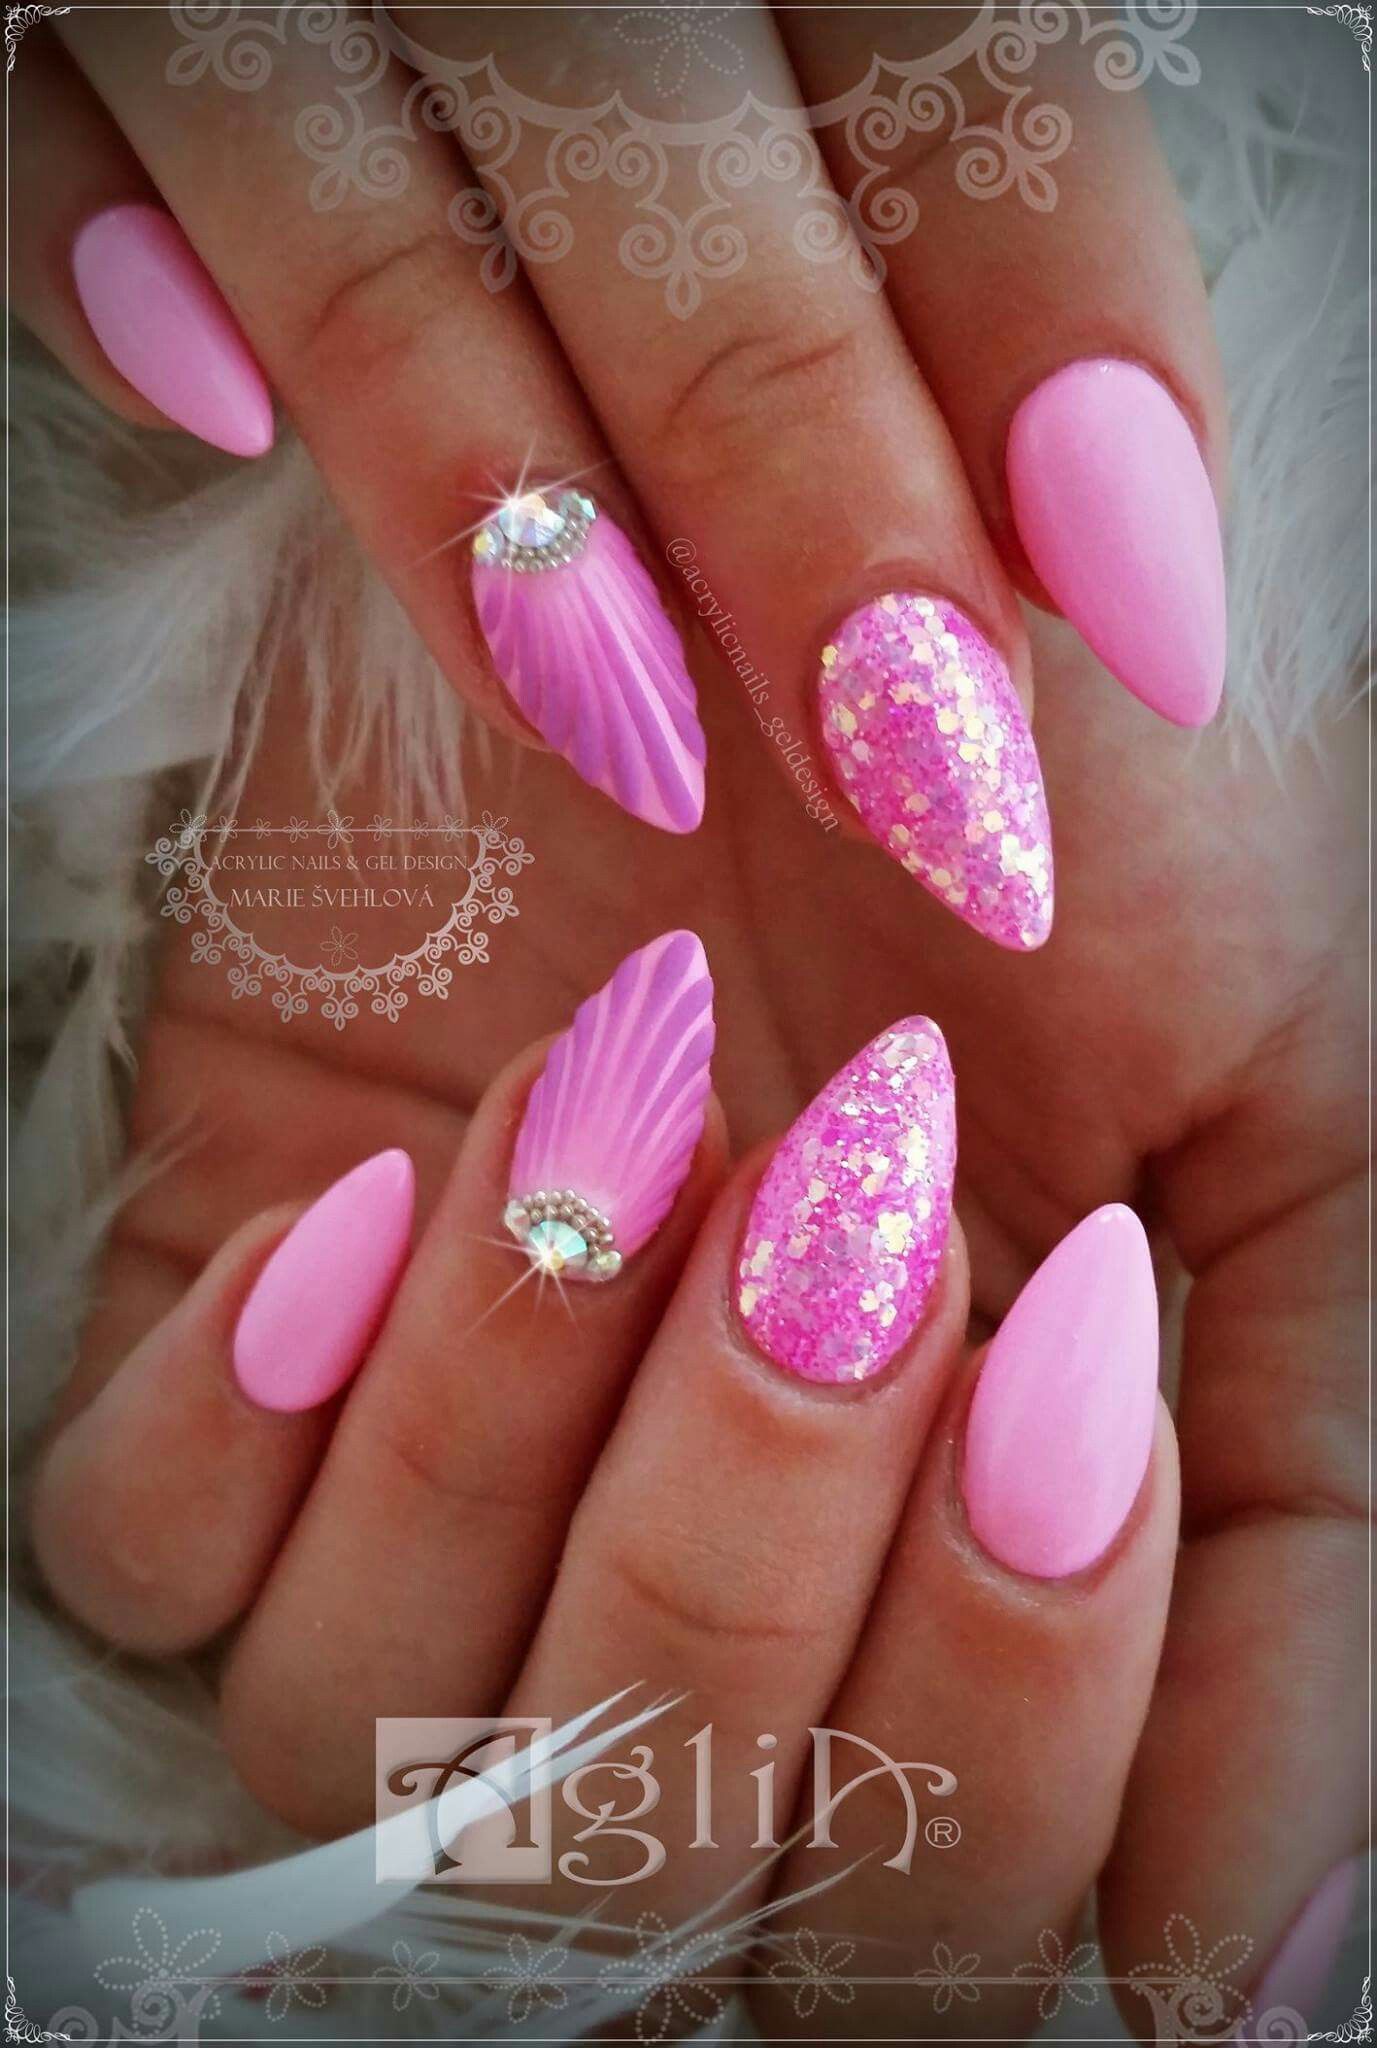 Acrylic Nails Gel Design Pink Nails Shell Nail Design With Images Gelove Nehty Nehty Ruzove Nehty